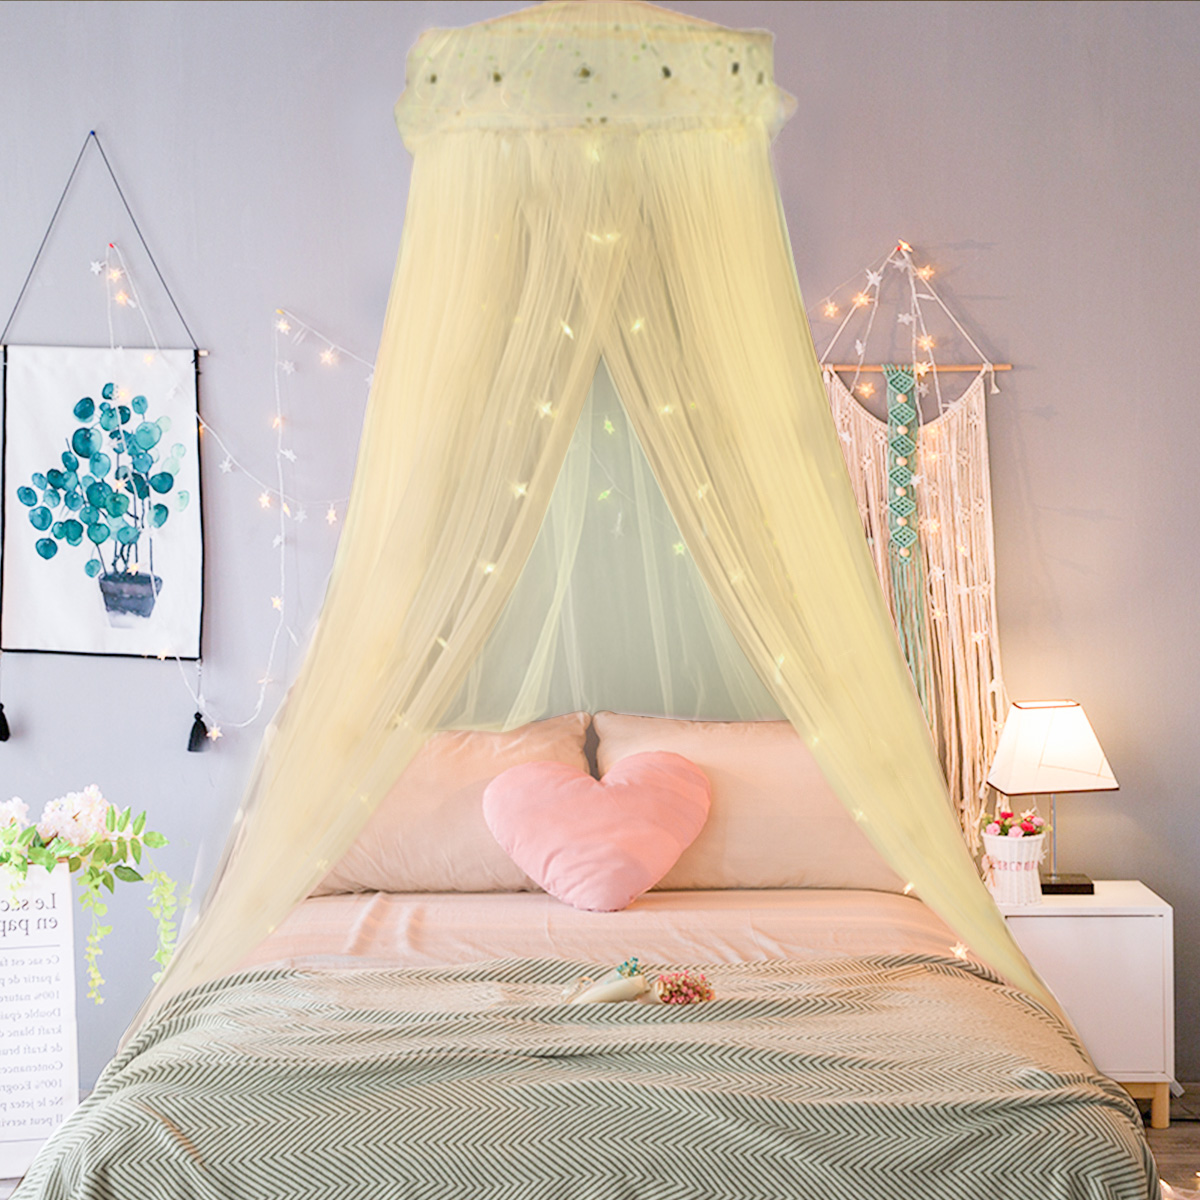 Elegant-Lace-Bed-Mosquito-Netting-Mesh-Canopy-Princess-Round-Dome-Bedding-Net-1305007-5